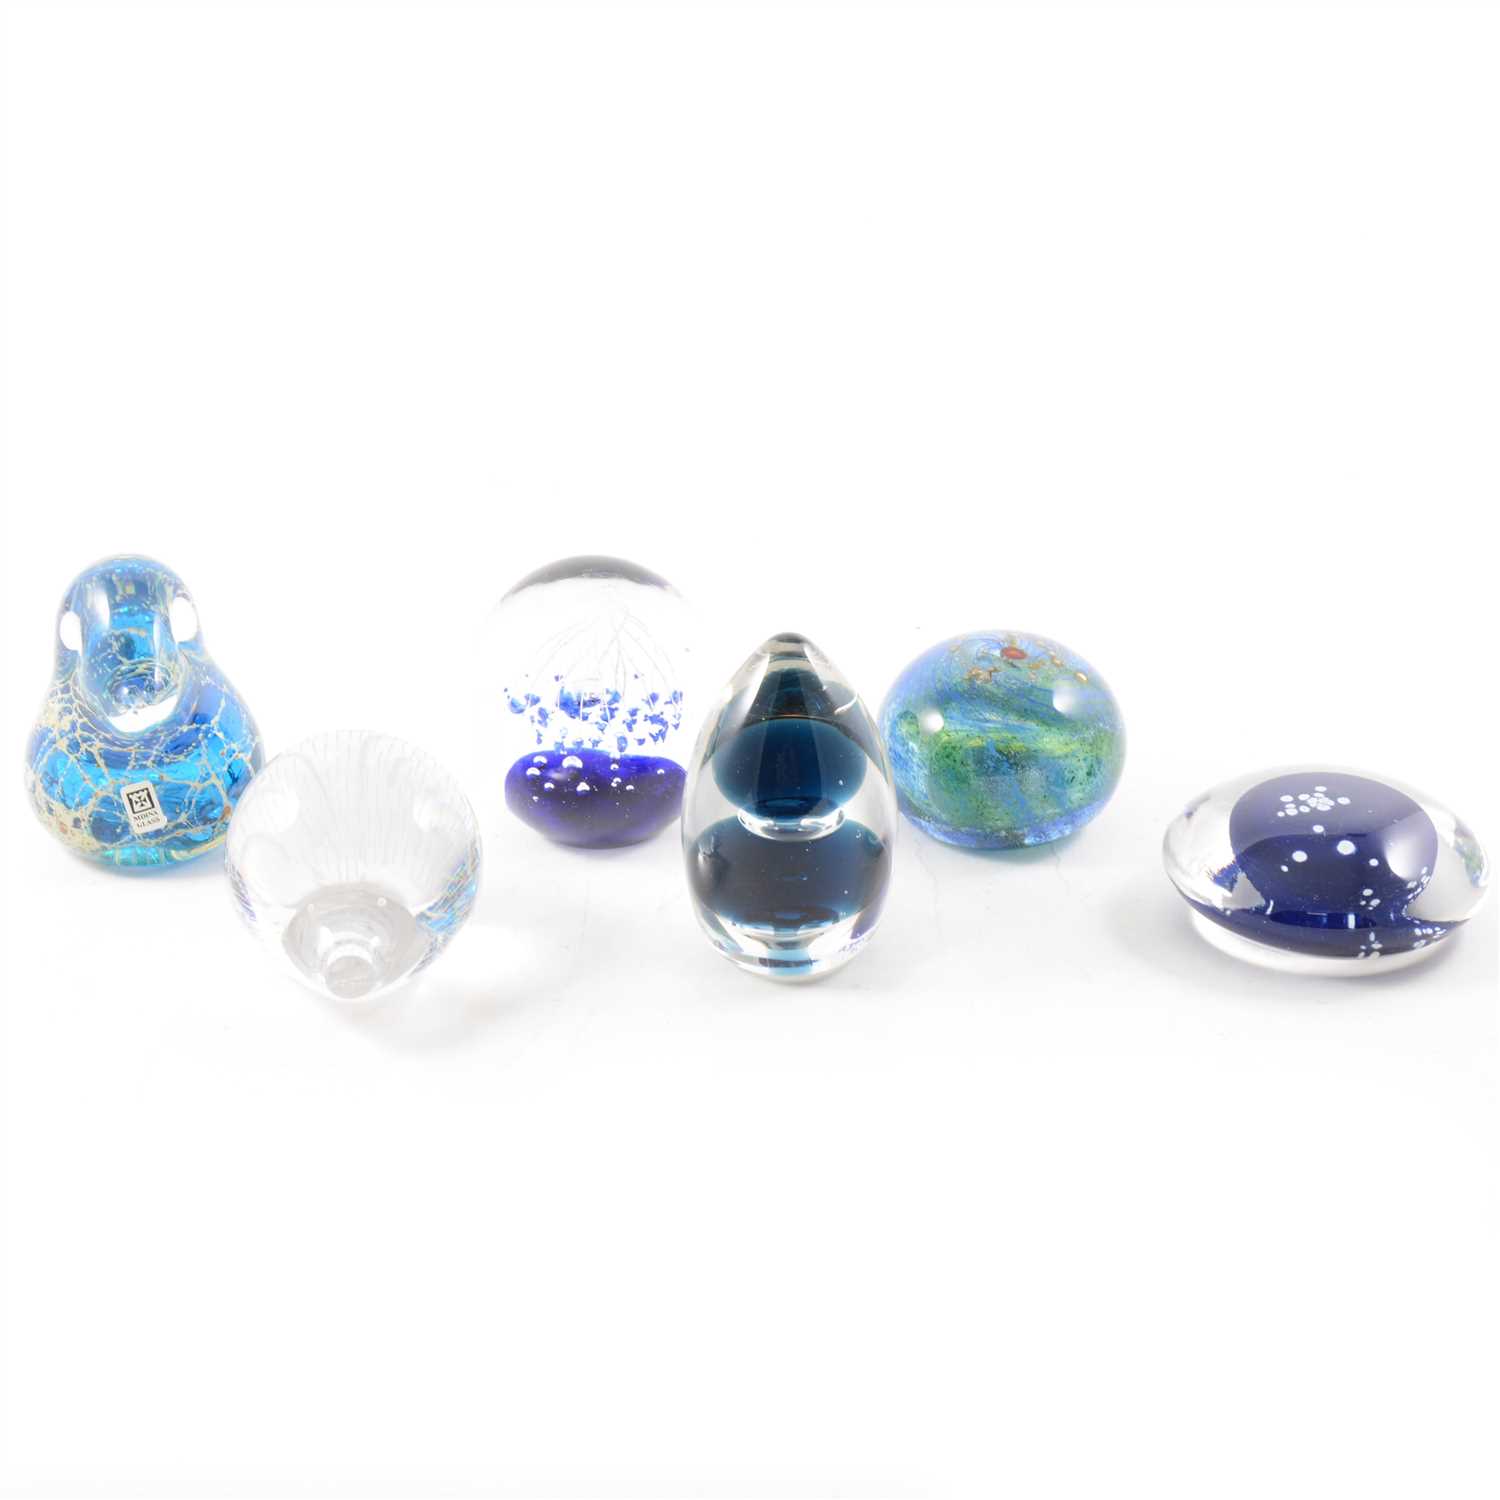 Lot 57 - A collection of glass paperweights, to include "Hedgehog" by Kosta Boda